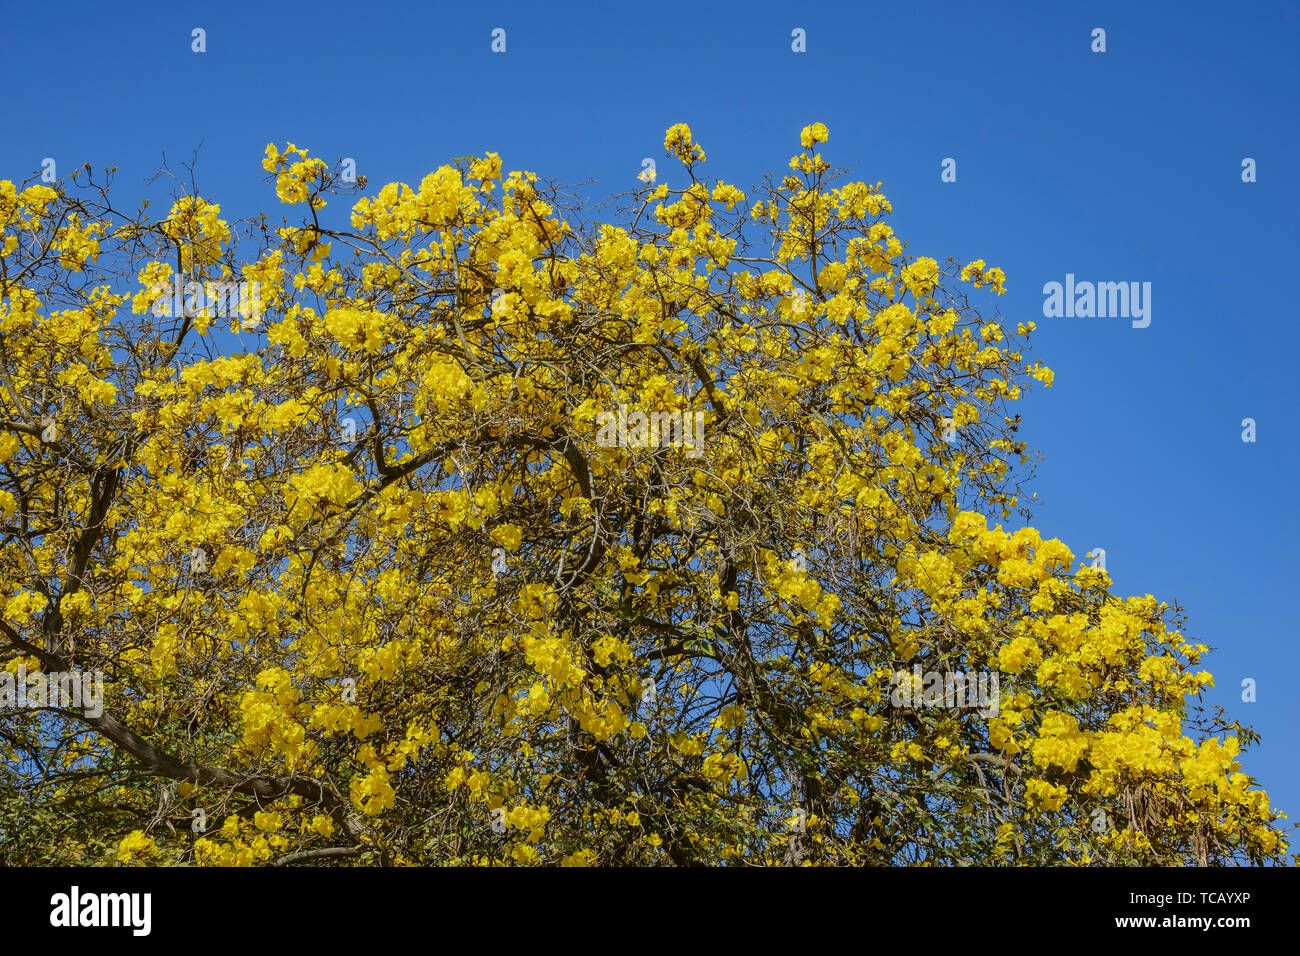 The beautiful yellow Handroanthus chrysotrichus blossom at Los Angeles, California Stock Photo